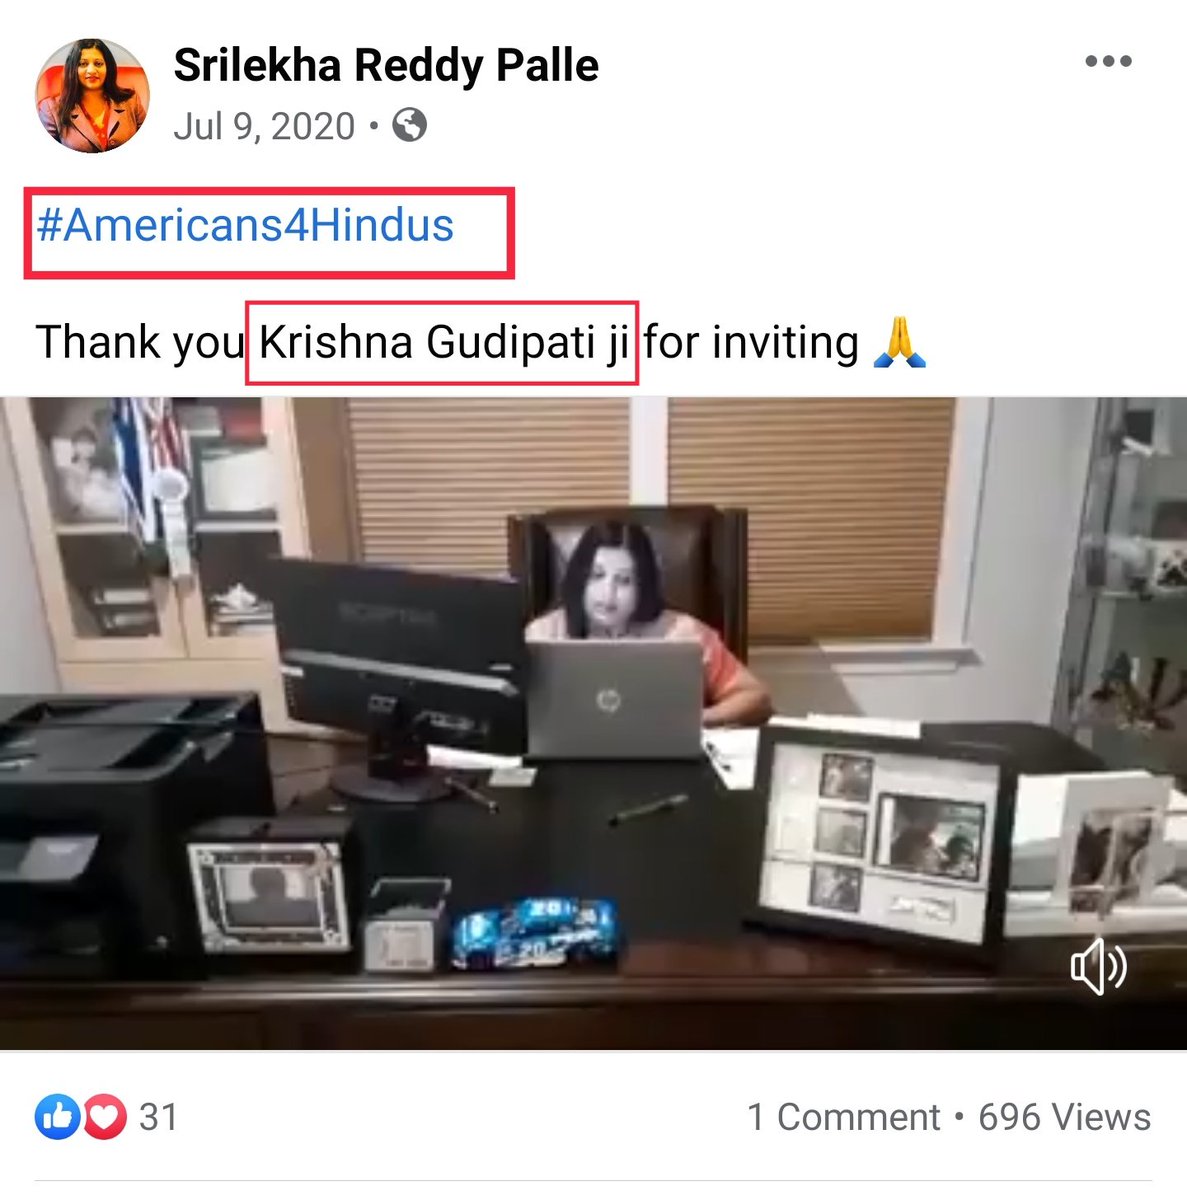 Look at the hashtag. These posts were by  @Srilekha_Palle on Facebook. Krishna Gudipati is organiser for several such events in America.